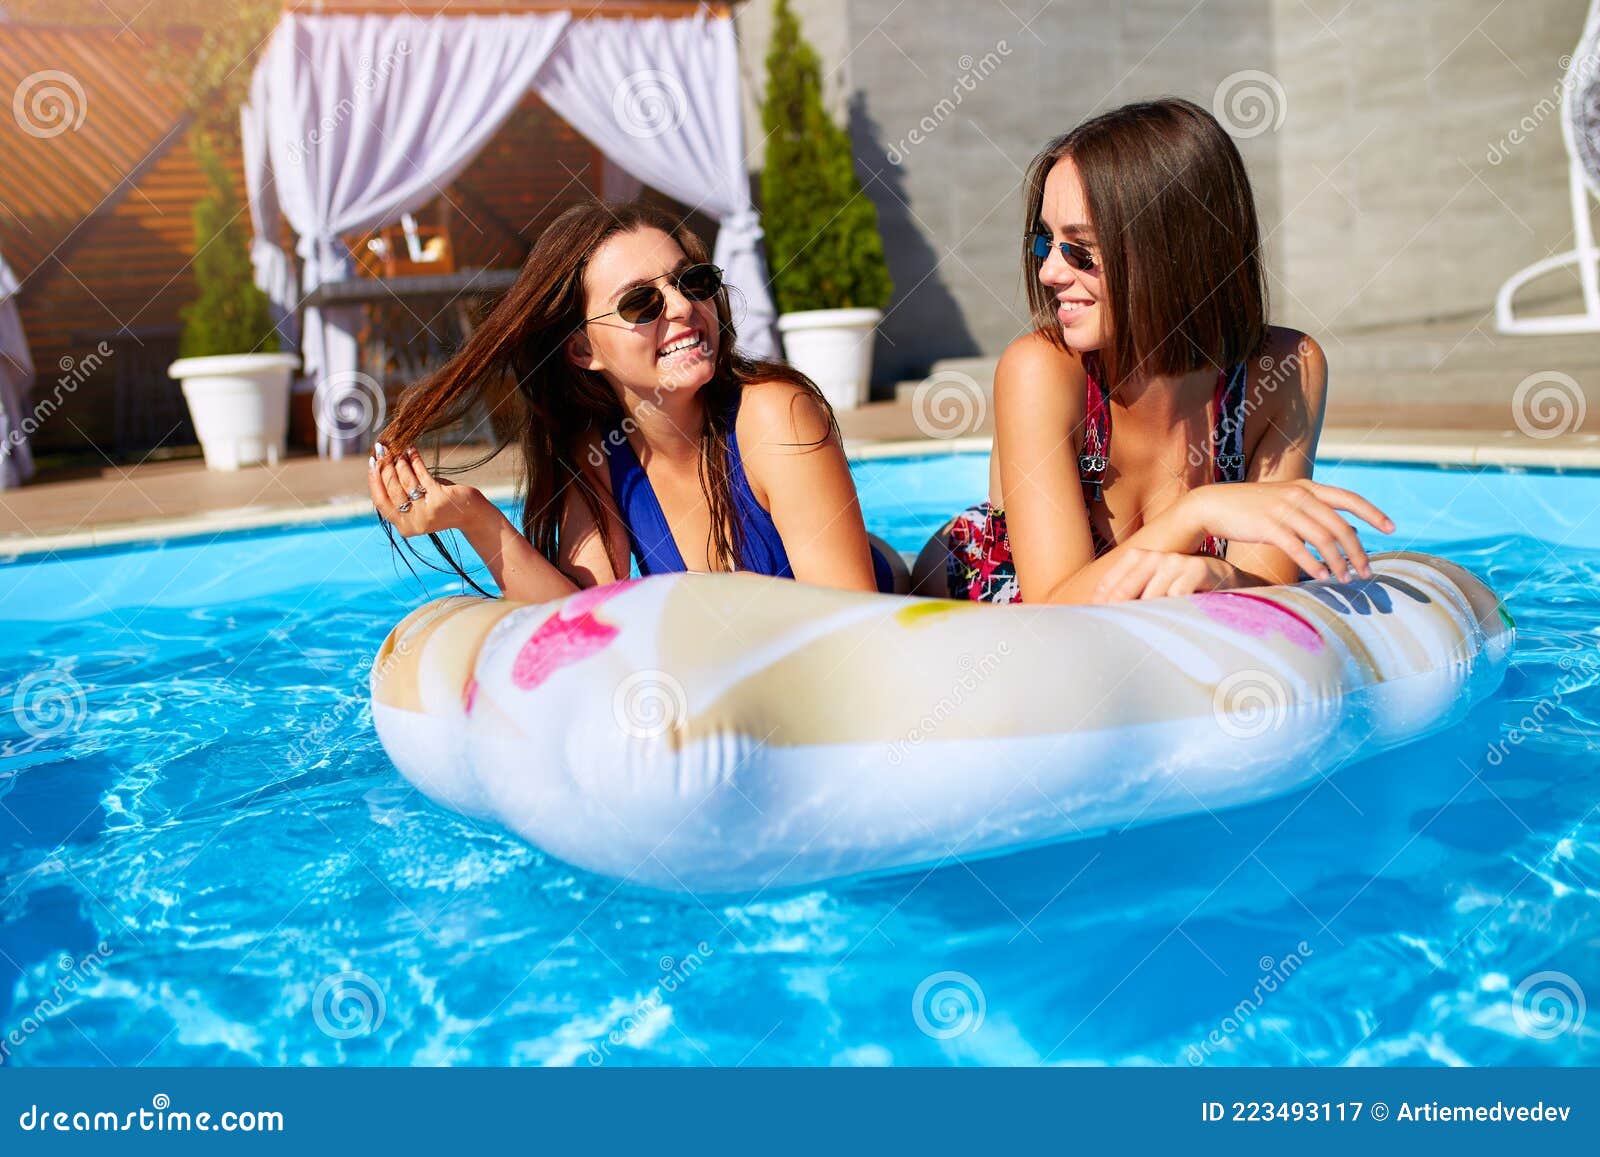 1574 Teen Pool Party Images, Stock Photos & Vectors